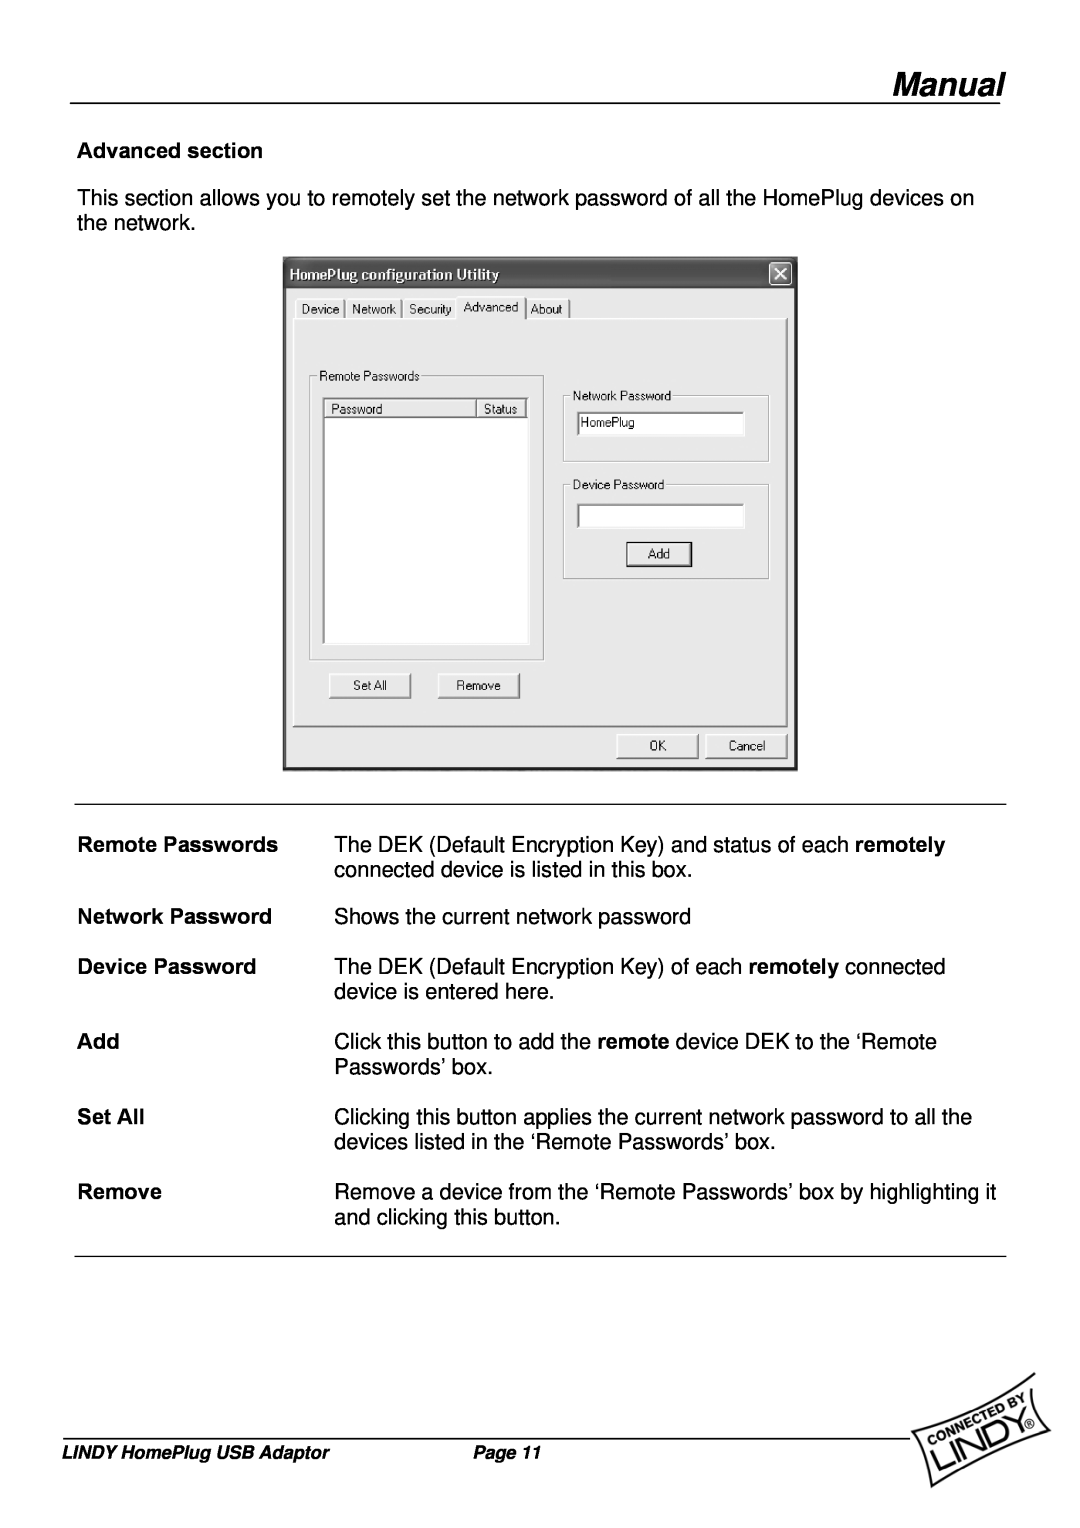 Lindy 25121 user manual Manual, The DEK Default Encryption Key and status of each remotely 